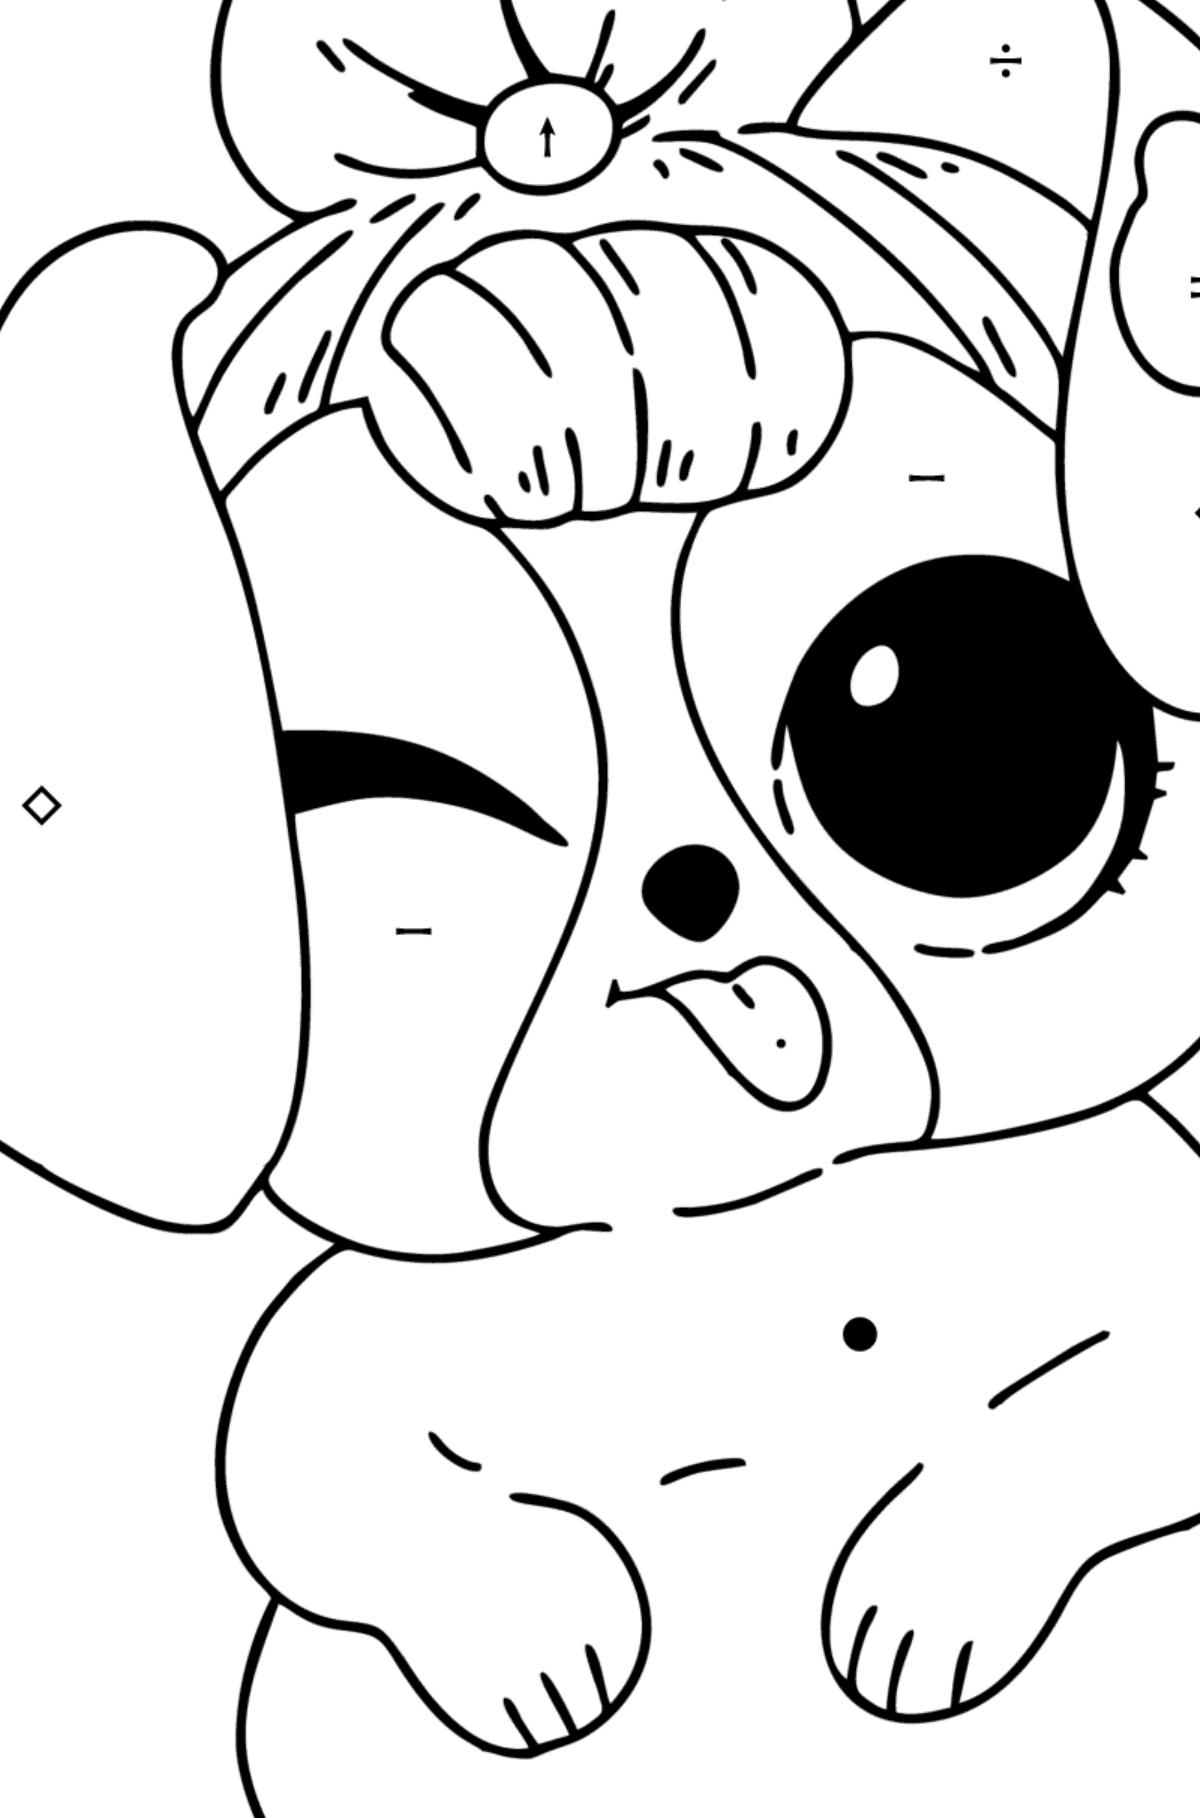 Coloring page LOL pet cute puppy - Coloring by Symbols for Kids